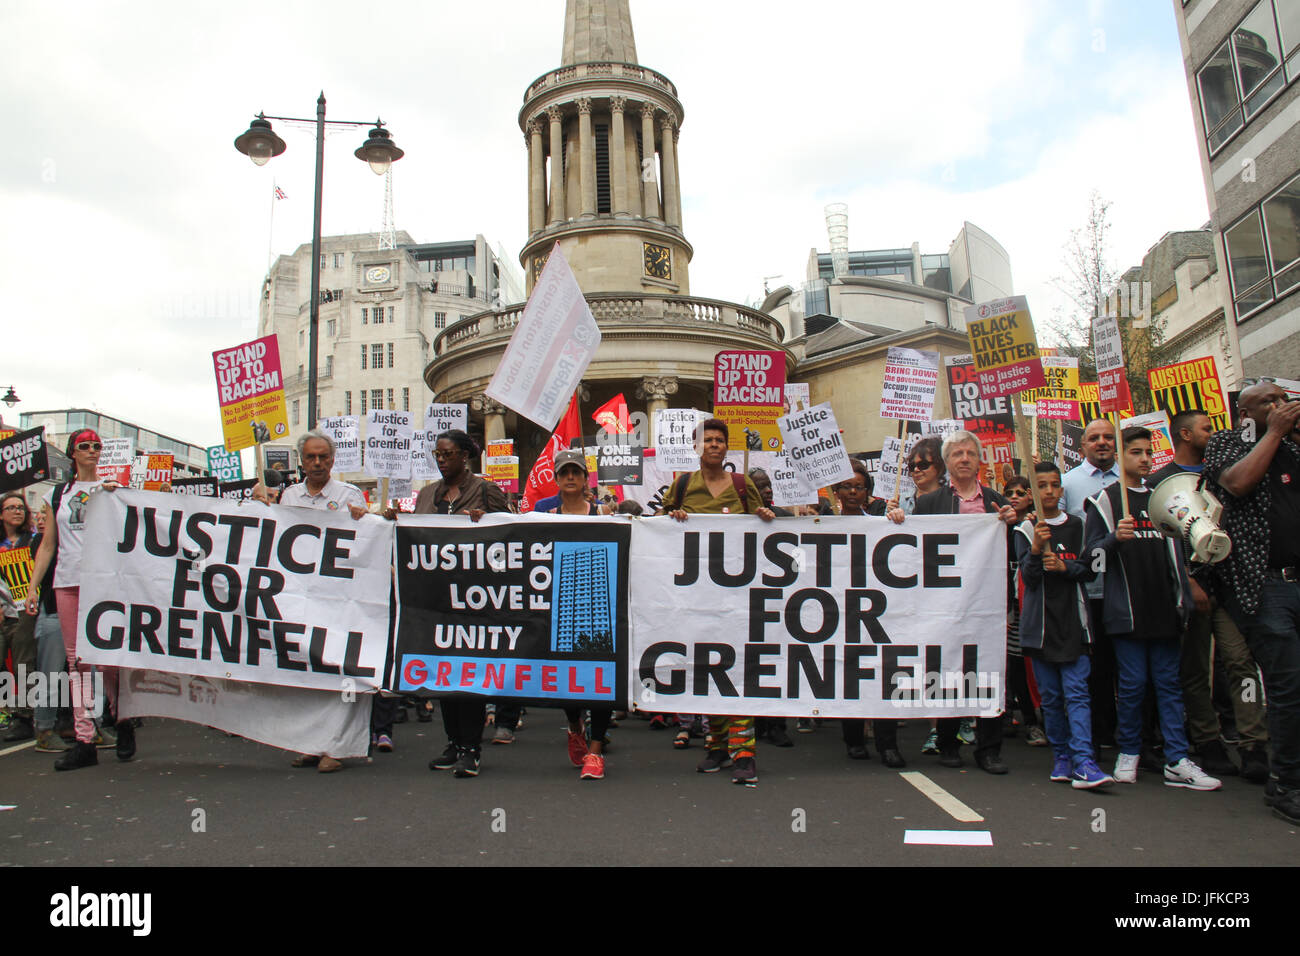 London, UK - 1 July 2017 - Demonstrators march holding a 'Justice for Grenfell' banner at the march in the Tories Out demo on 1 July .The demo began at Portland Place with demonstrators marching to Parliament Square for a rally. Credit: David Mbiyu/Alamy Live News Stock Photo